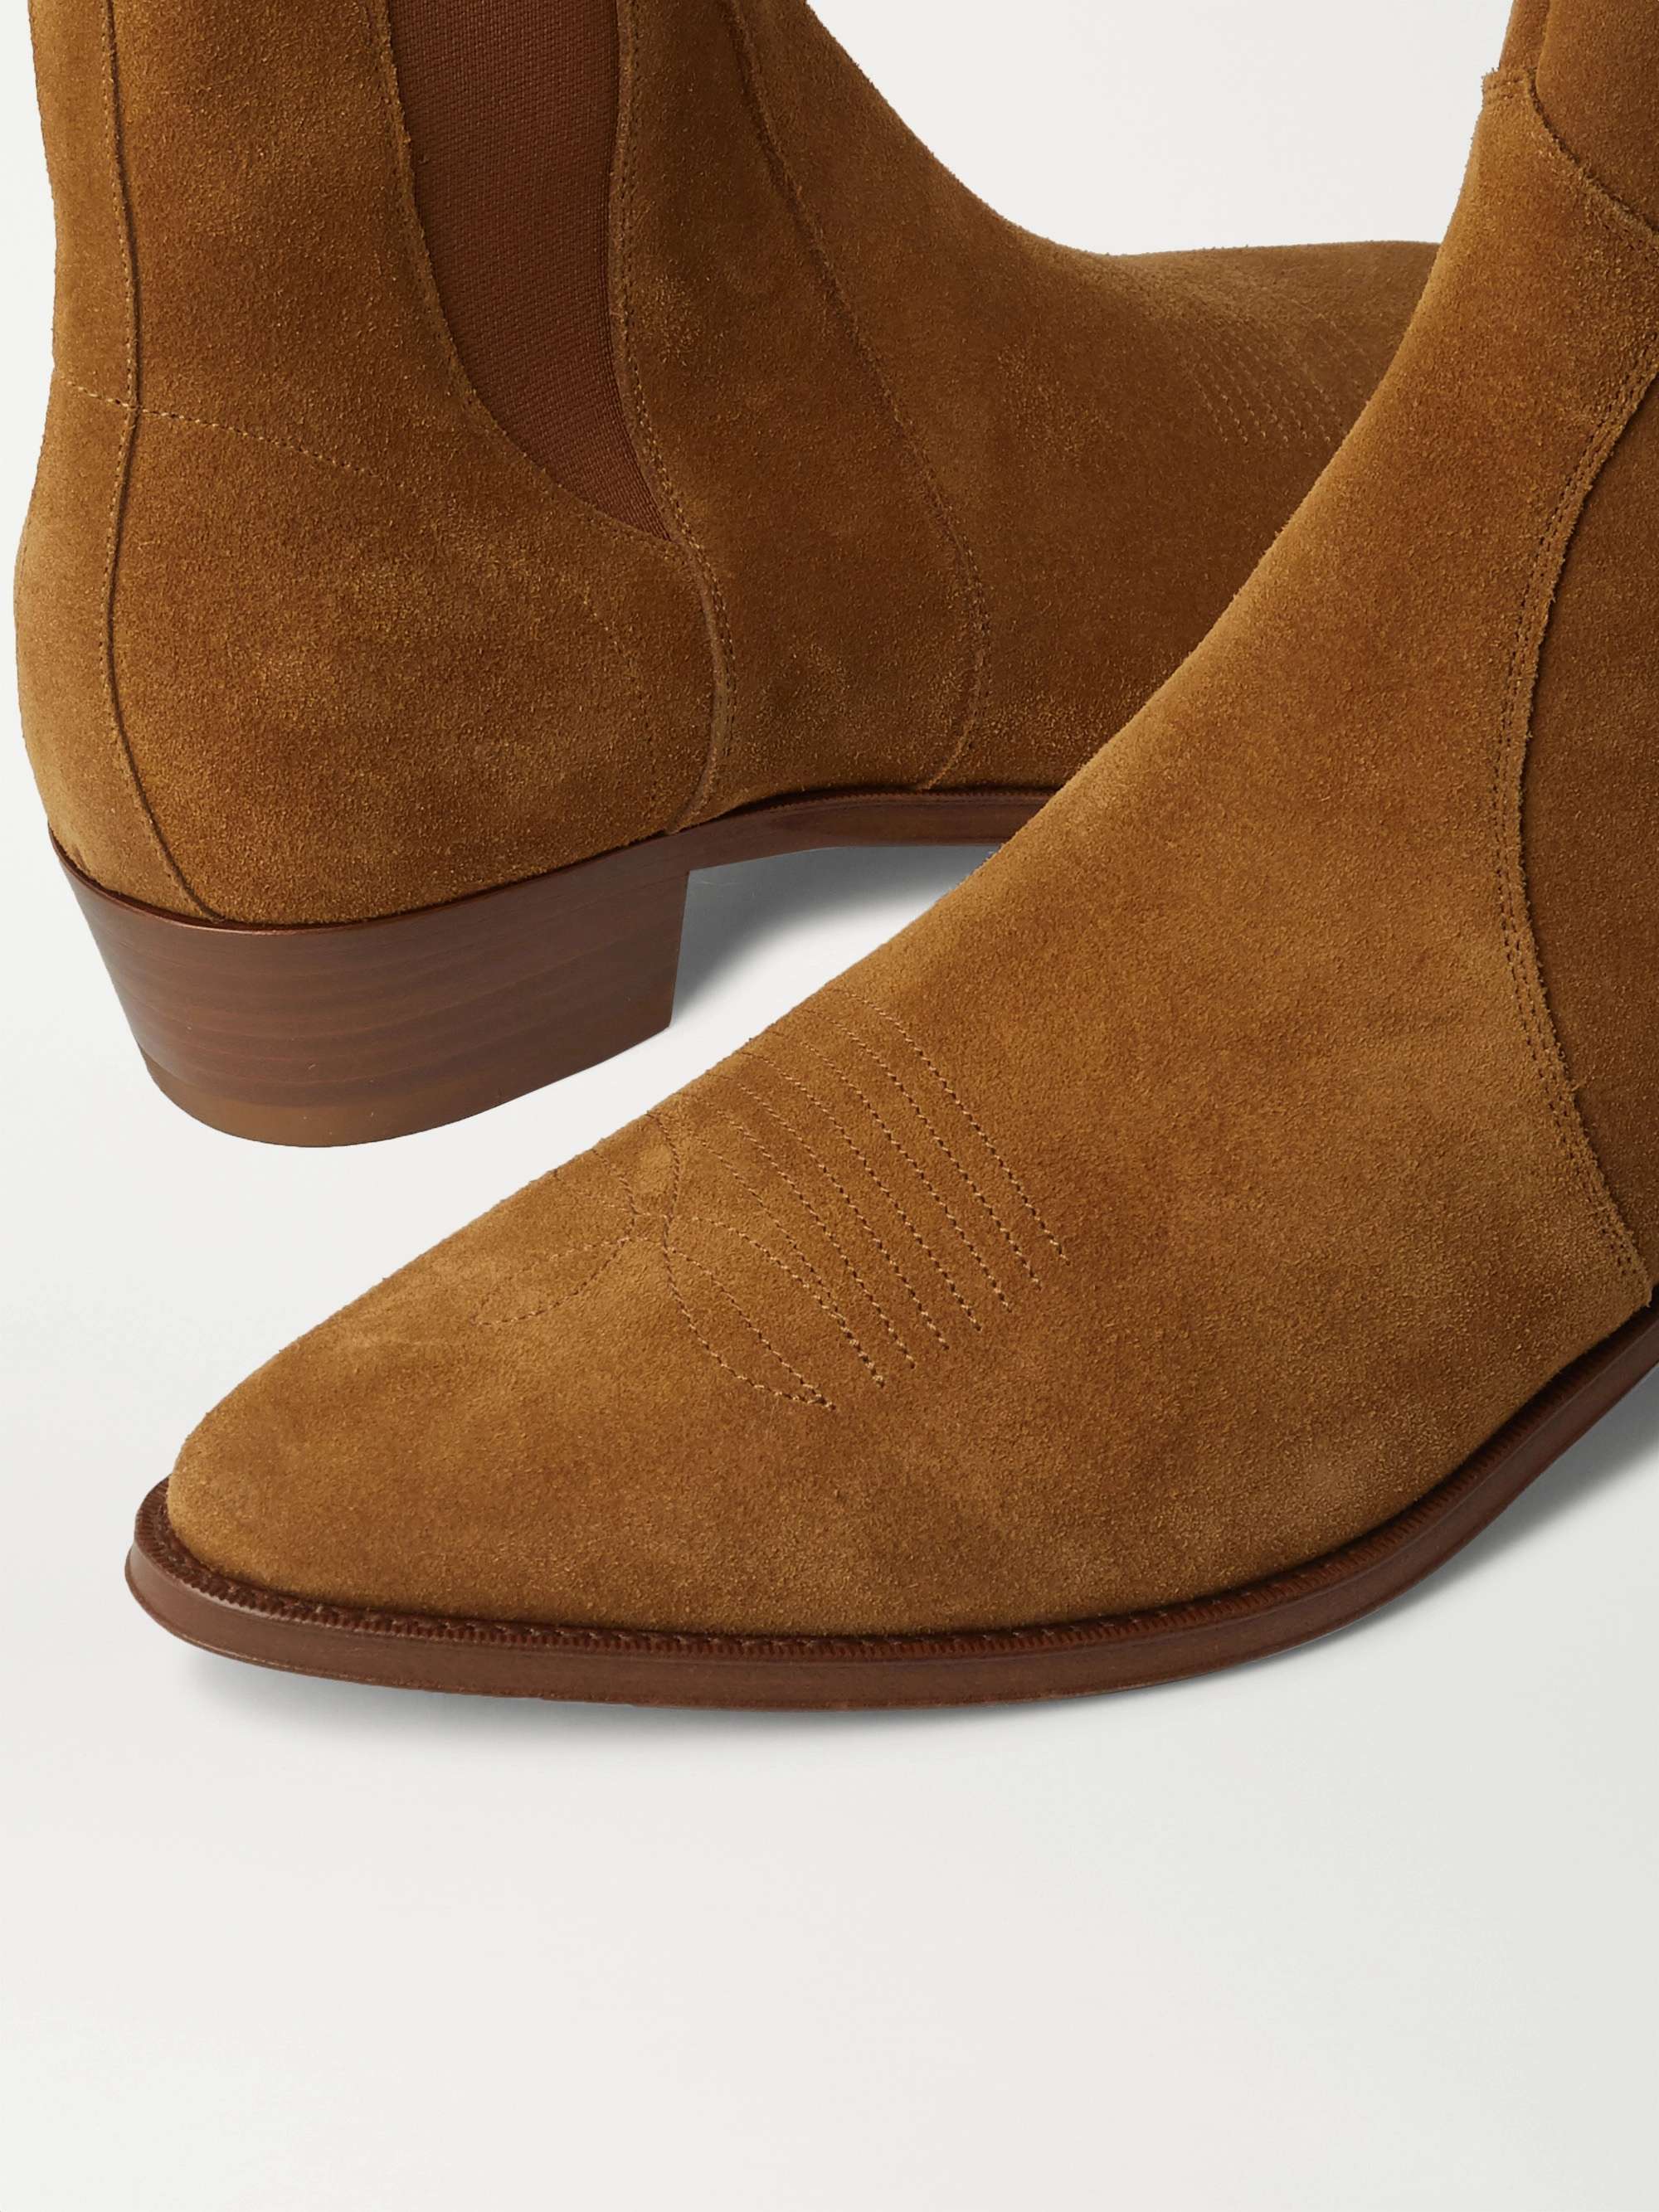 CELINE HOMME Suede Chelsea Boots